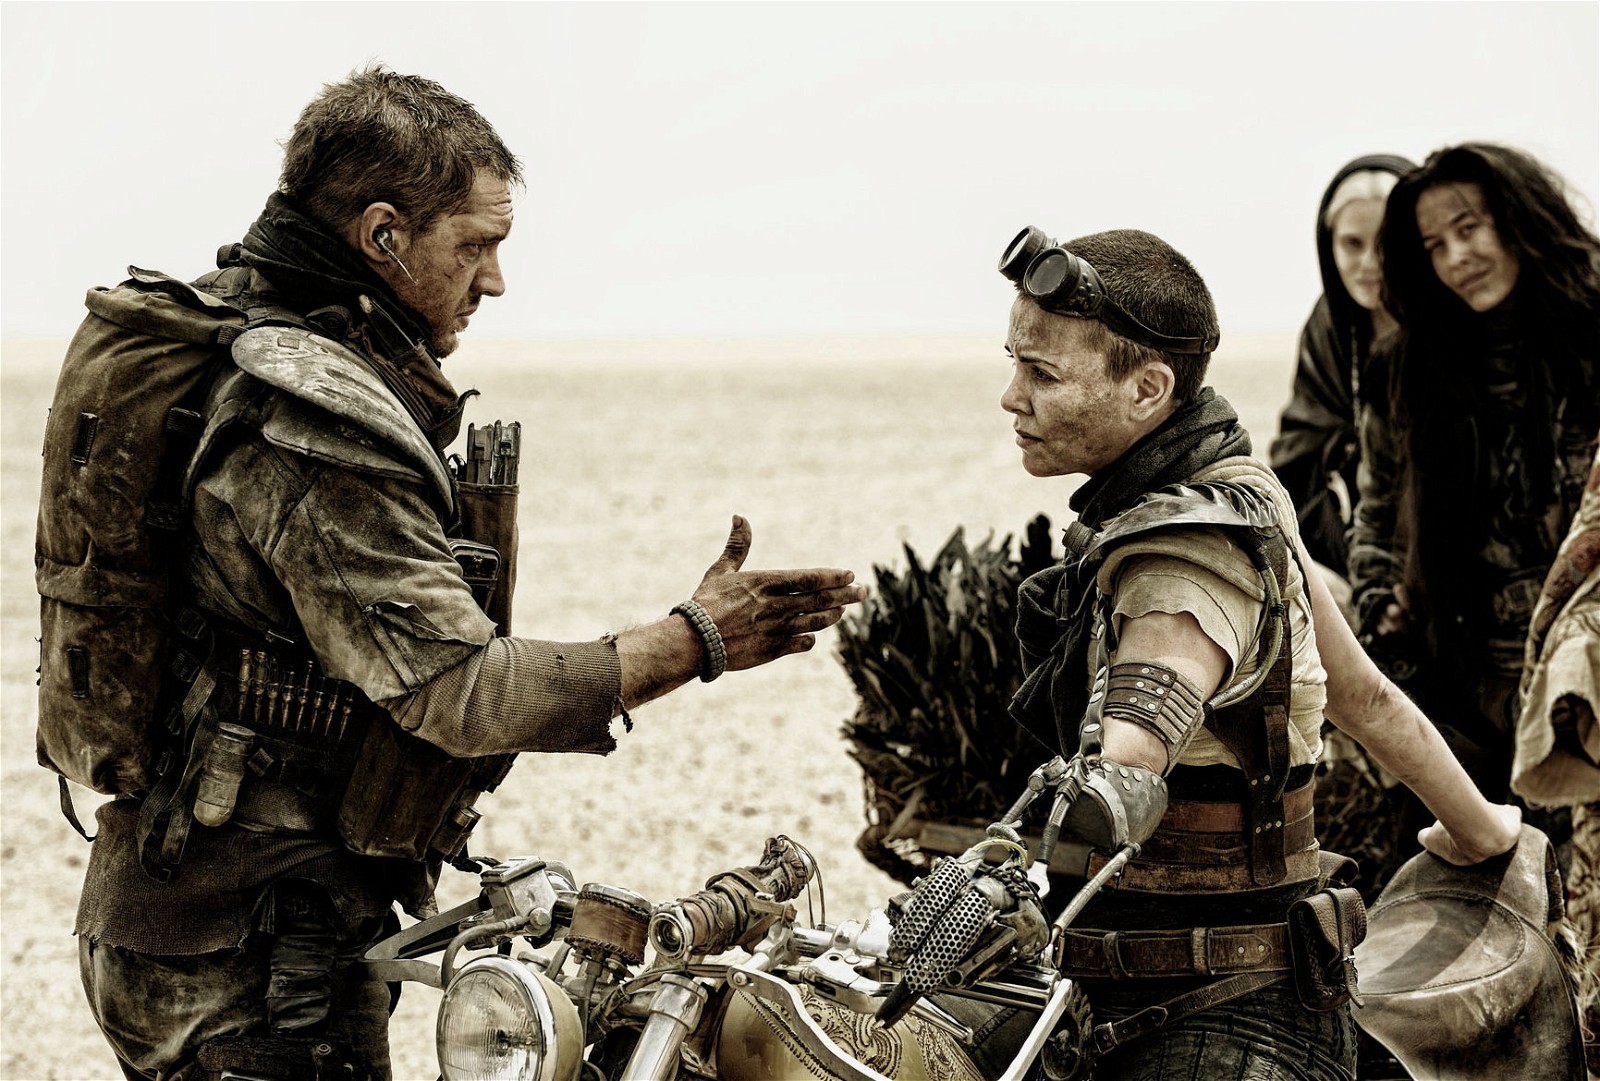 Hardy did not get along with his Mad Max co-star Charlize Theron